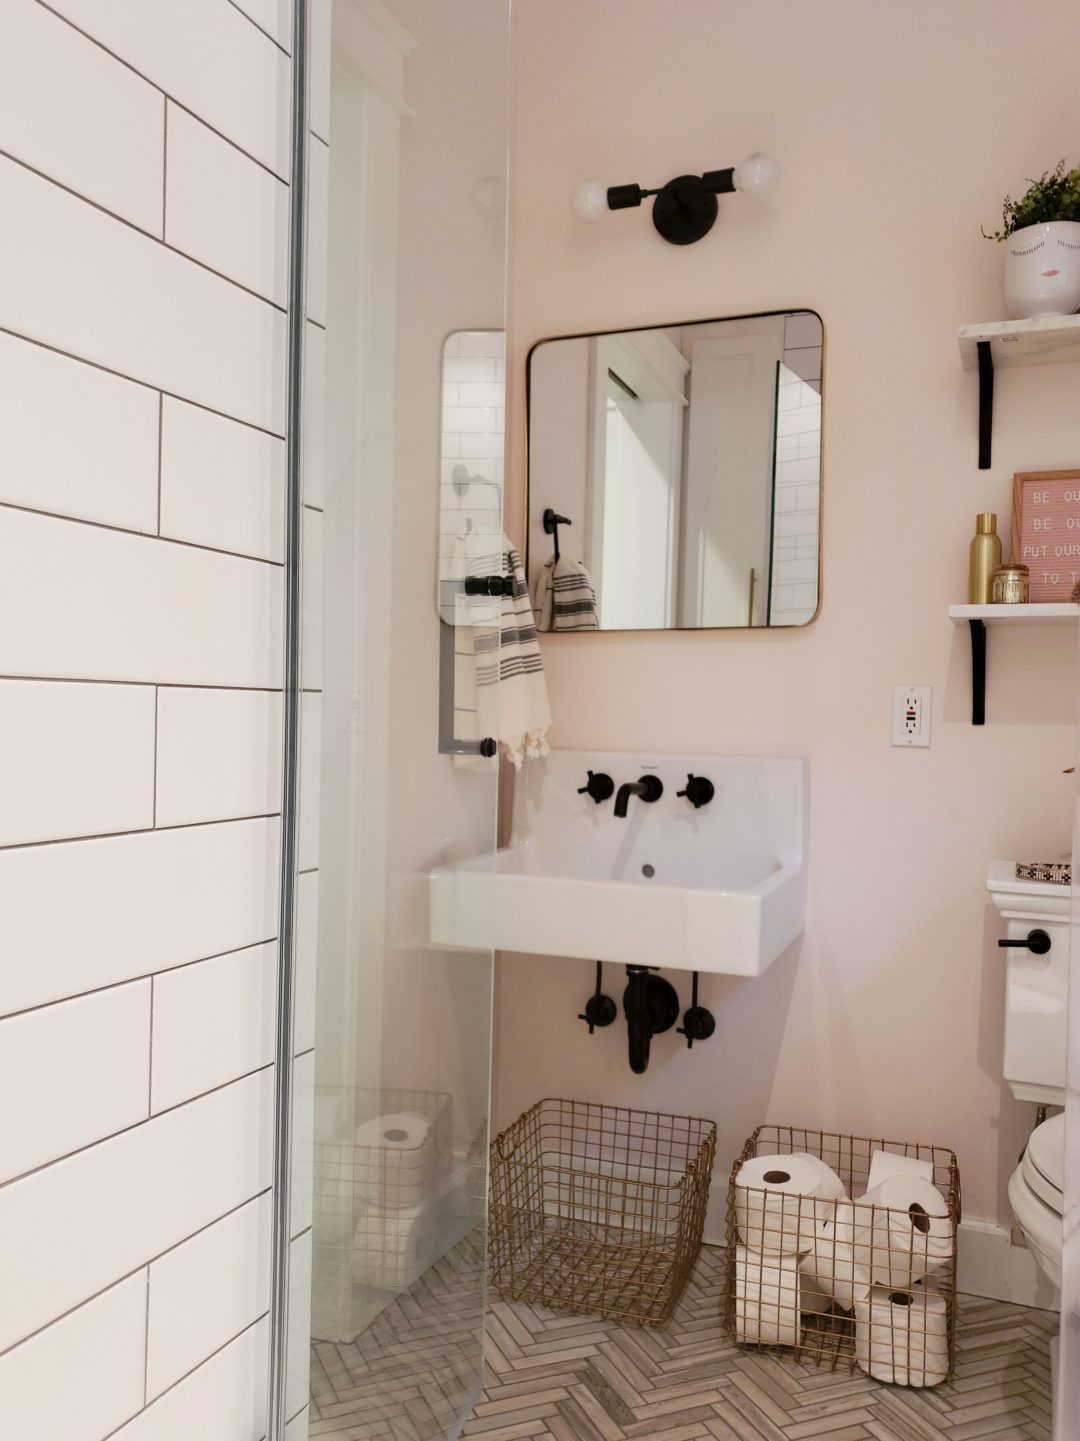 Renovation tips: Maximize your small bathroom space (and budget!)